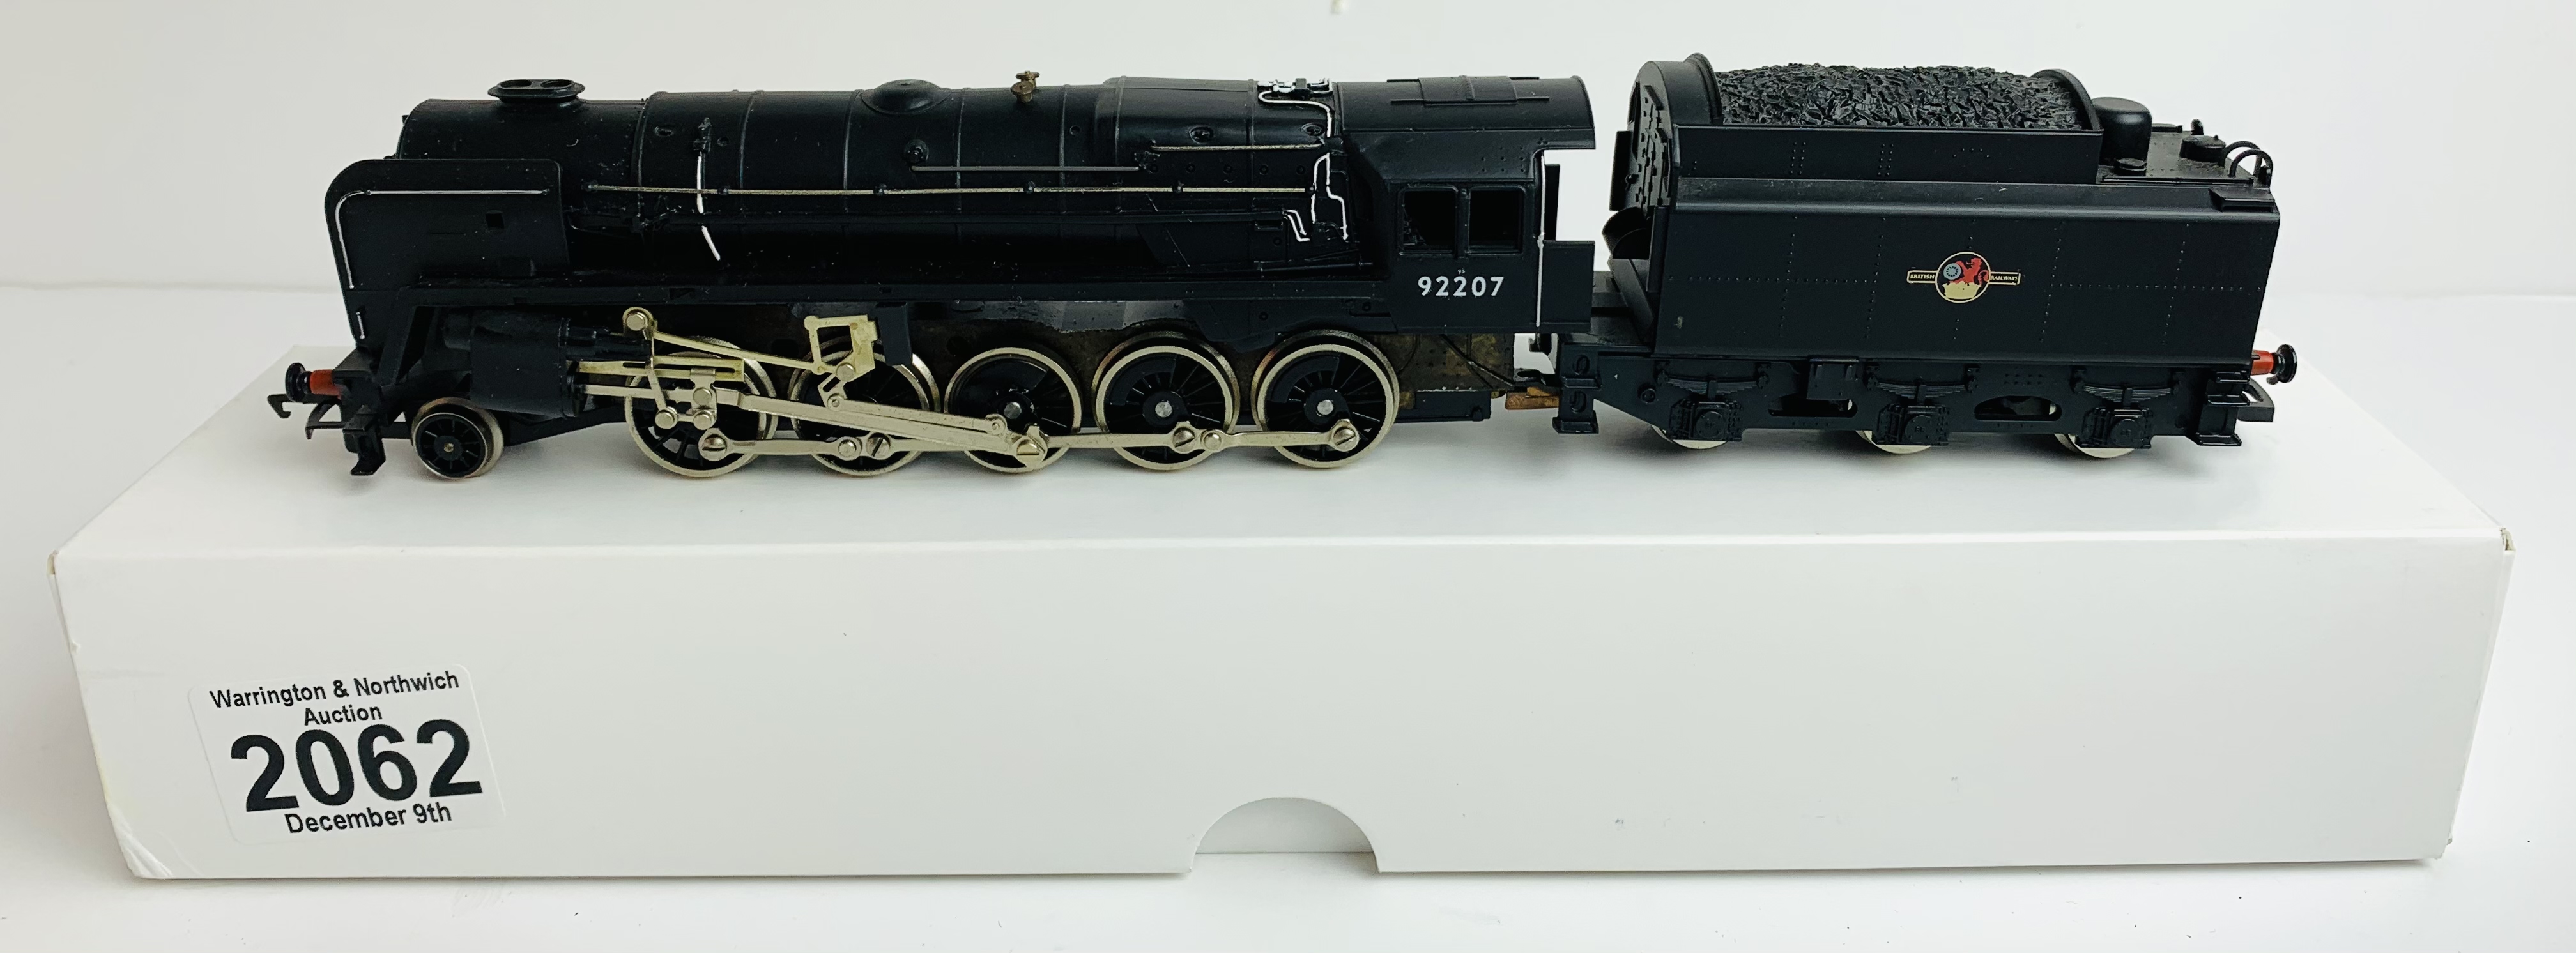 Hornby OO BR Black 92207 9F Loco - Supplied in Plain White BoxP&P Group 1 (£14+VAT for the first lot